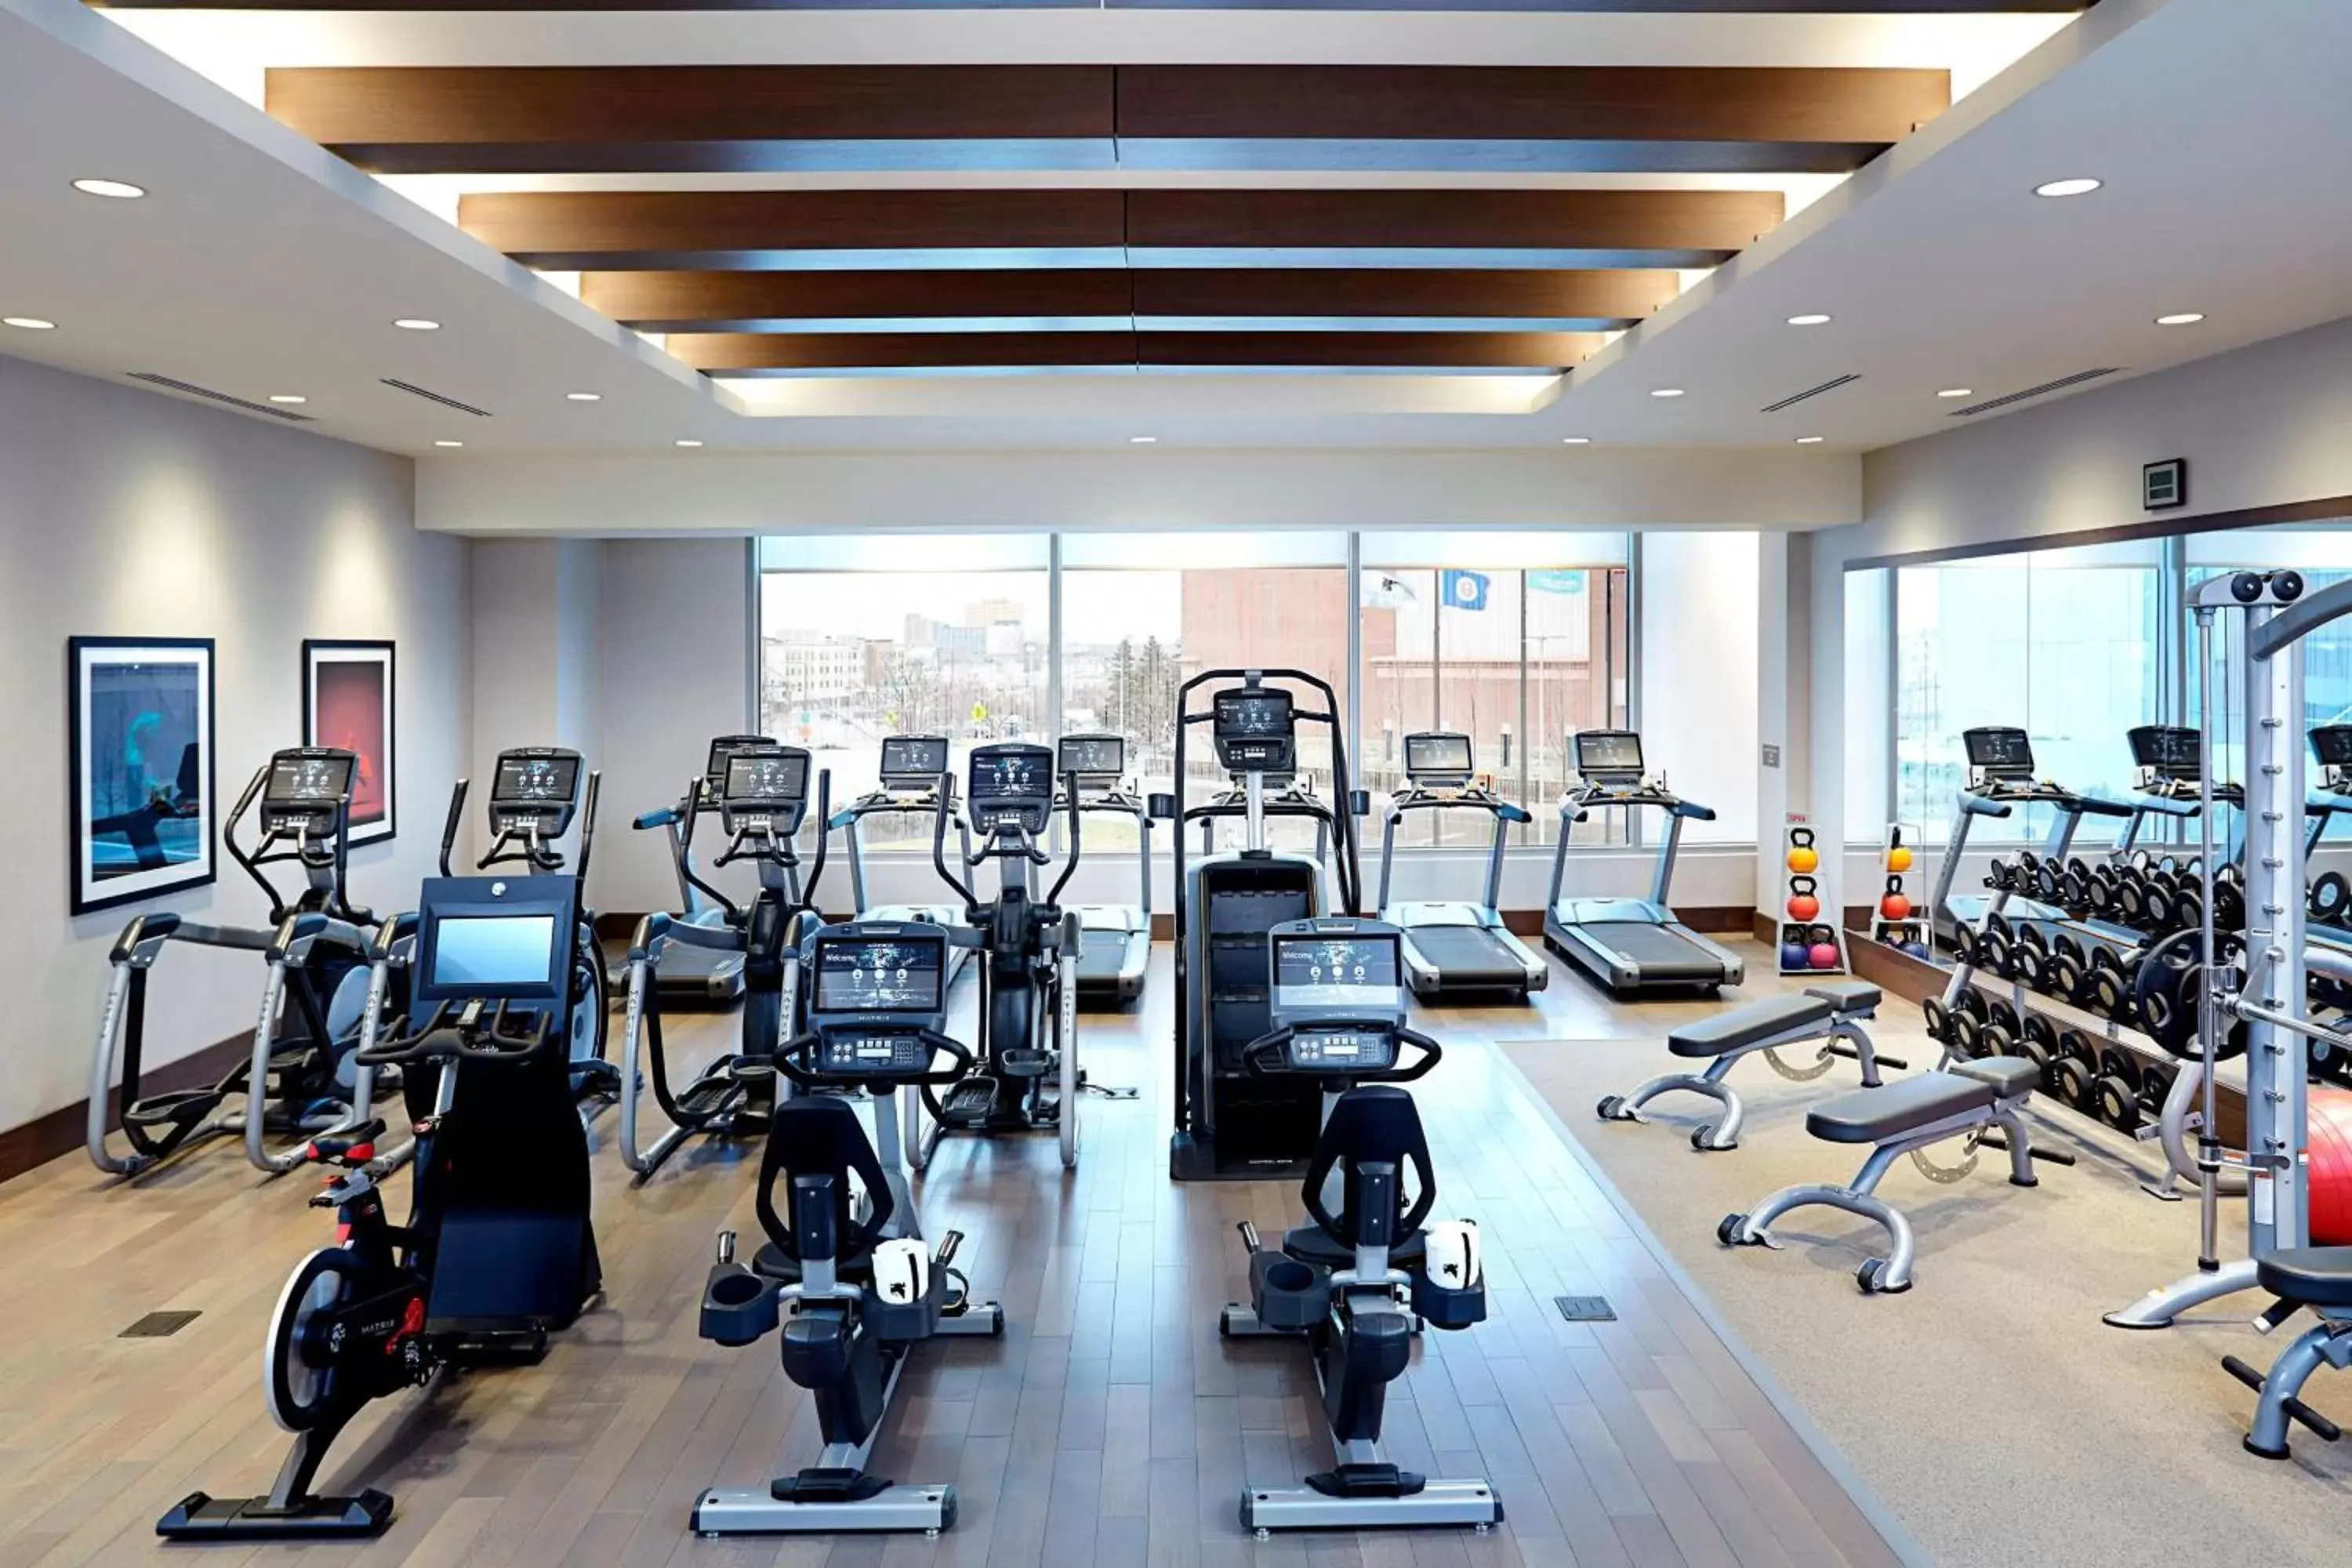 Fitness centre/facilities, Fitness Center/Facilities in JW Marriott Minneapolis Mall of America